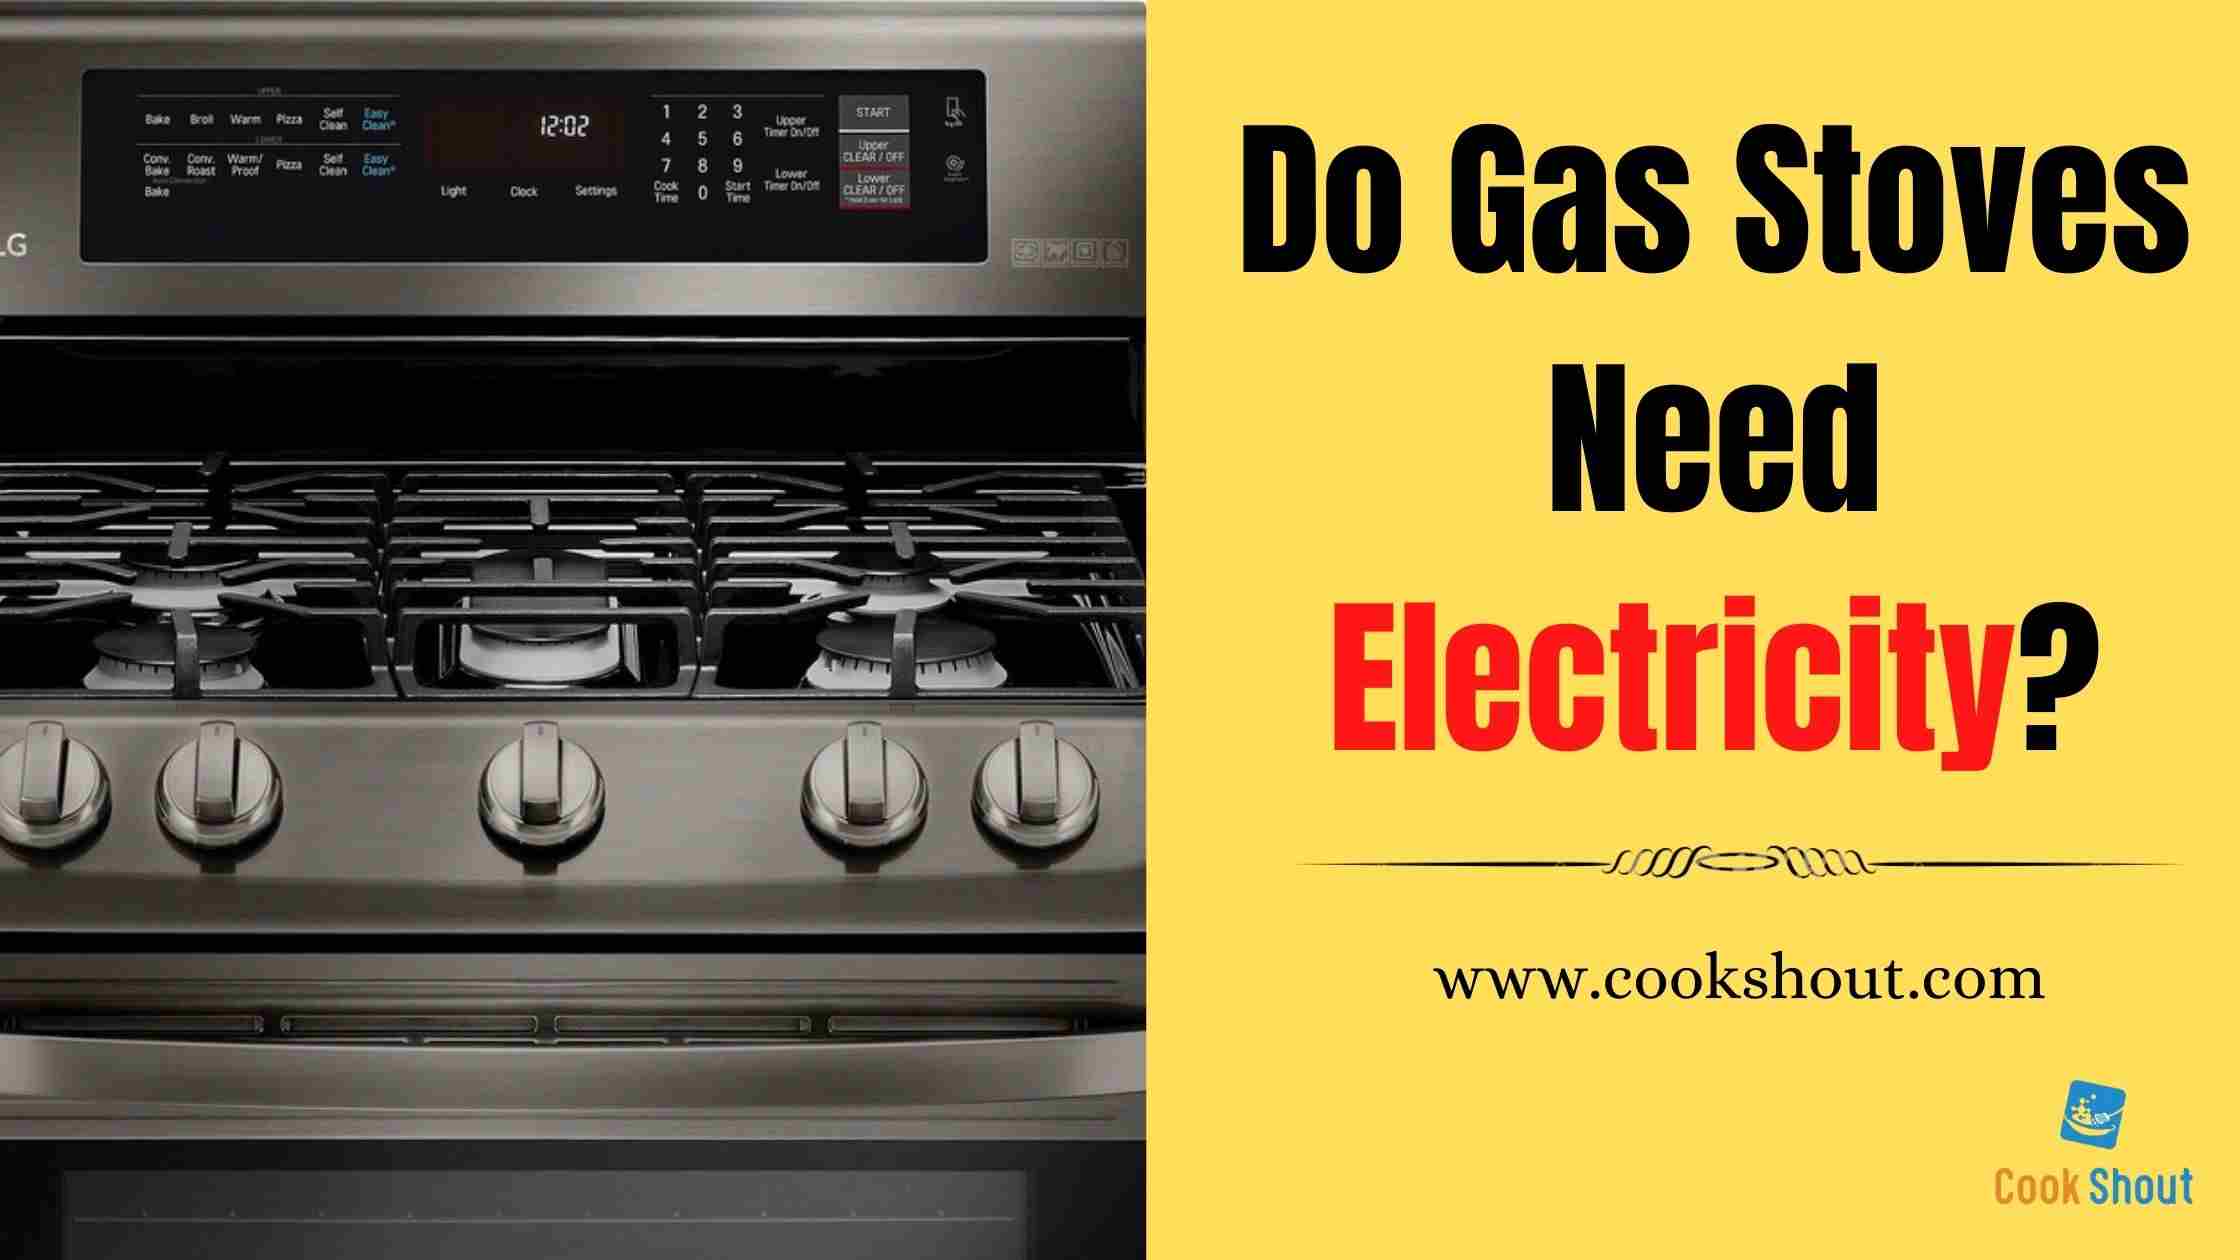 Do Gas Stoves Need Electricity